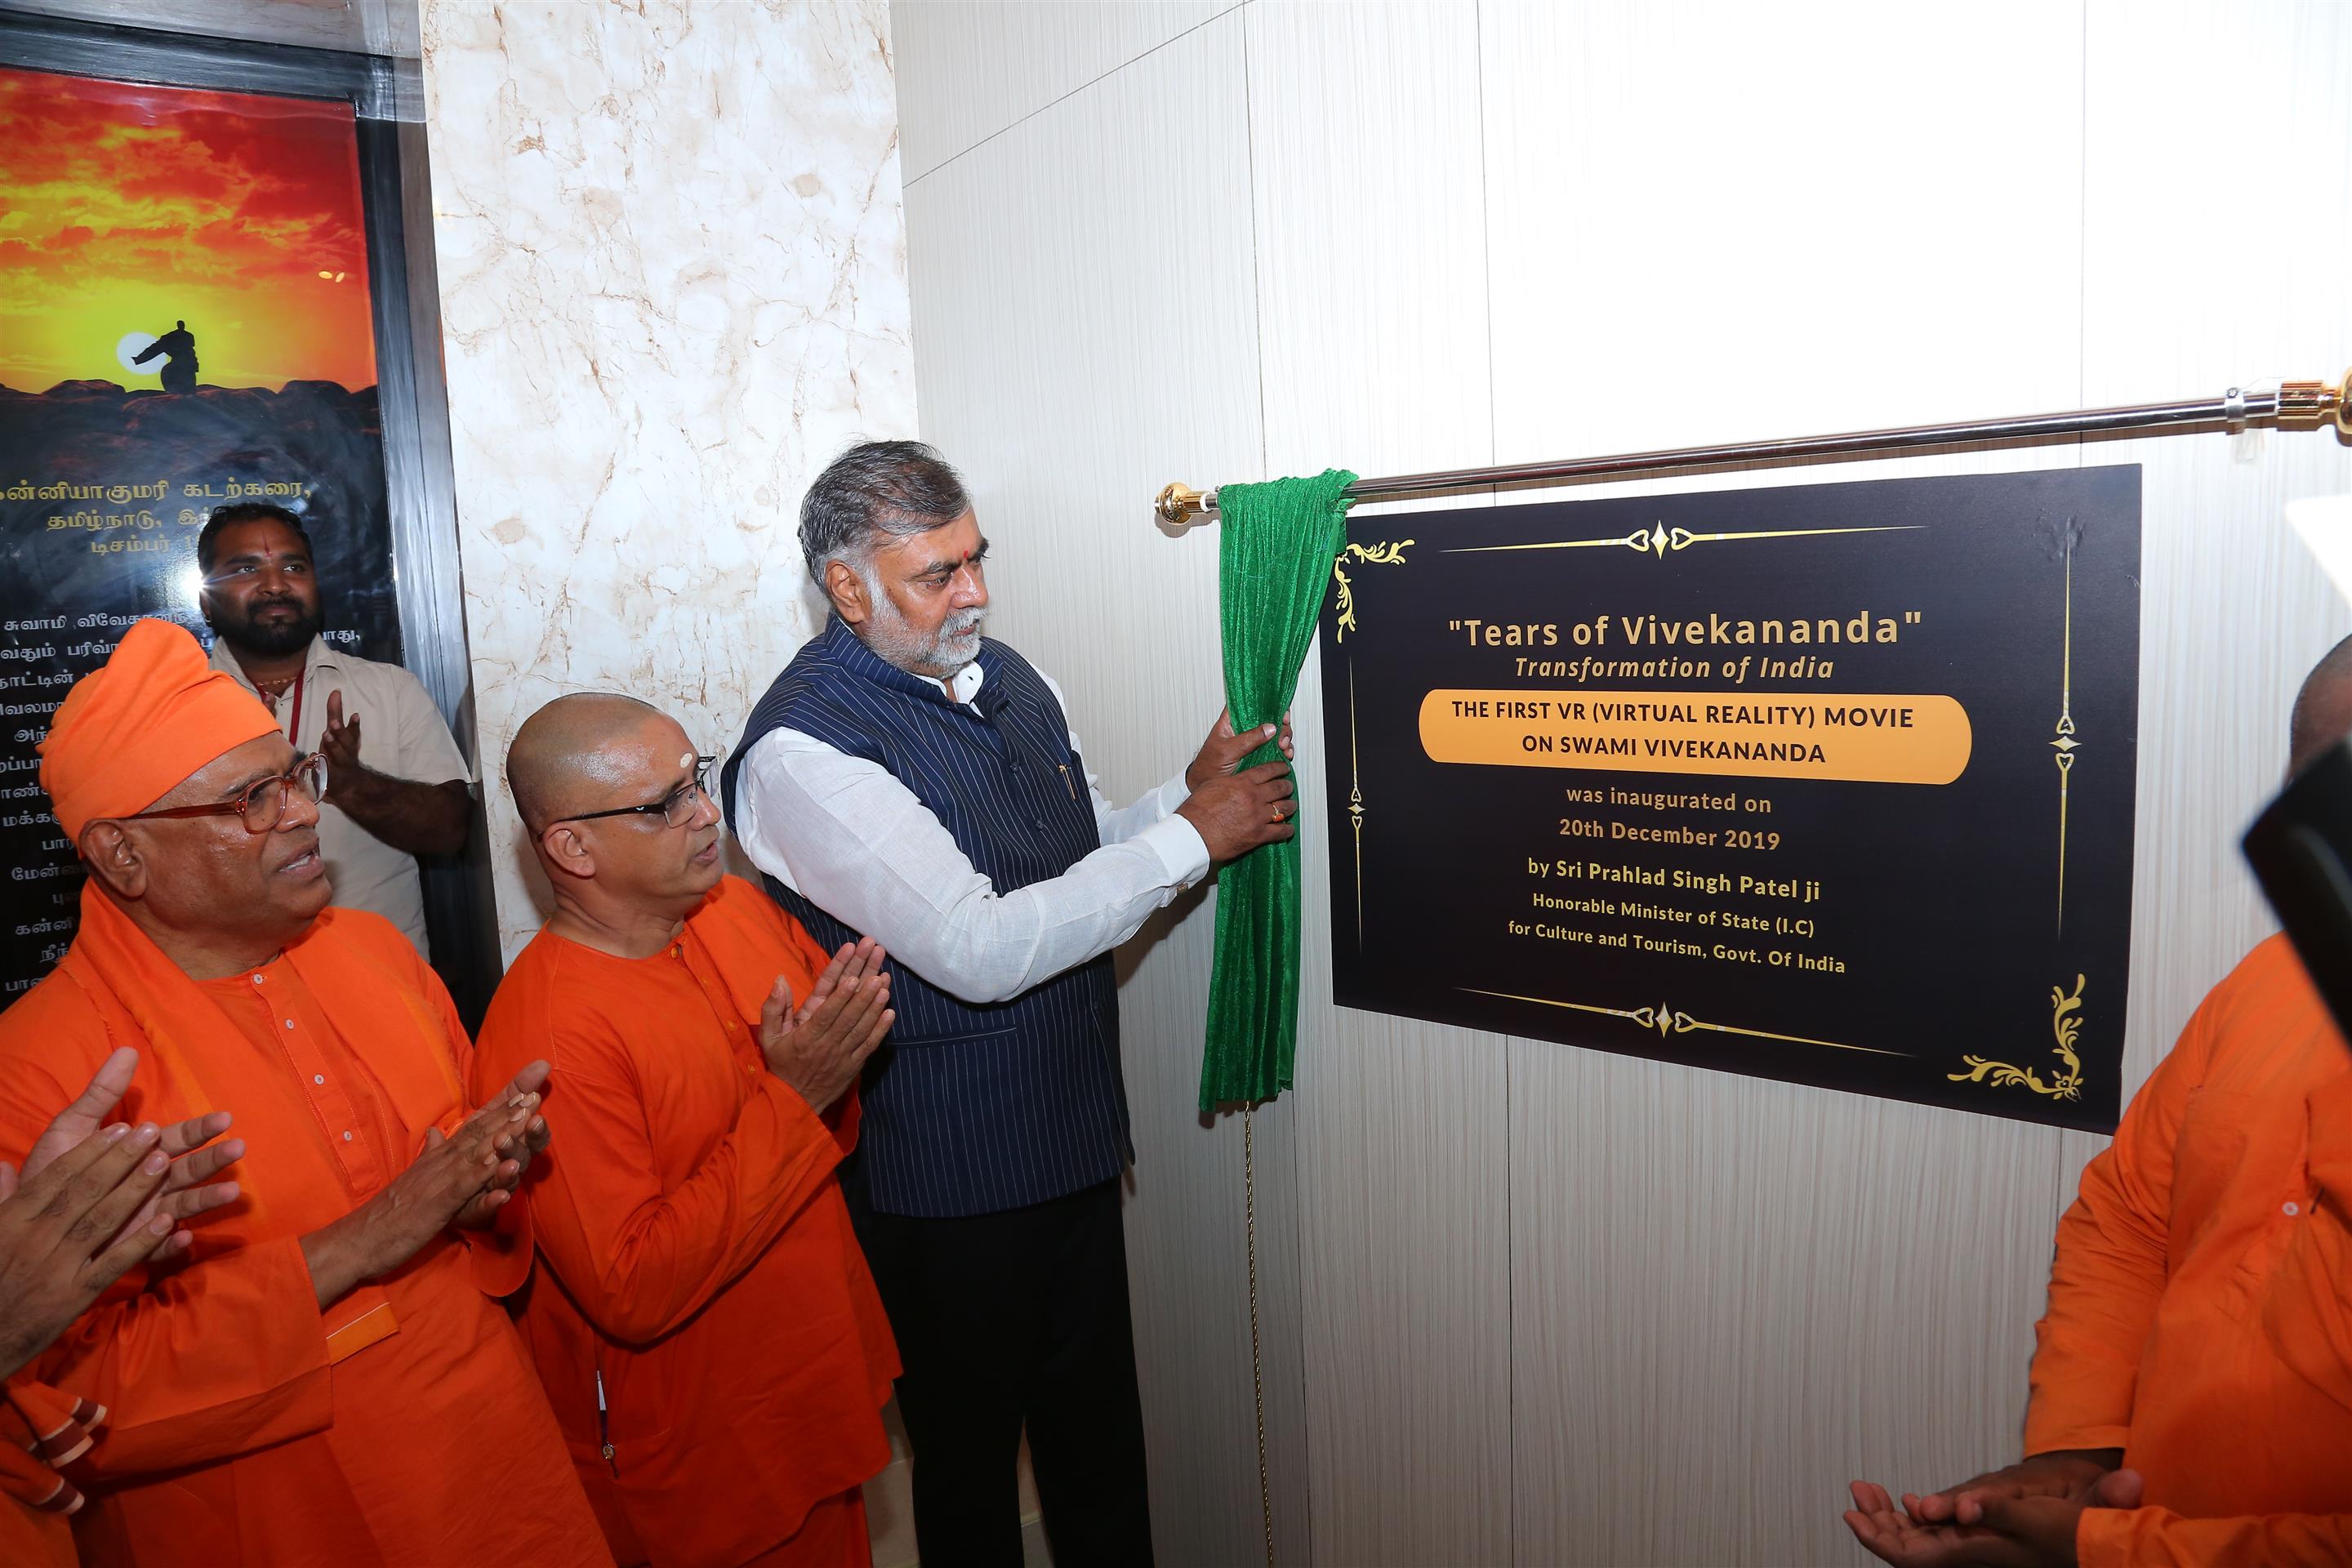 Union Minister of State (I/C) for Culture and Tourism Shri Prahlat Singh Patel unveiling the plaque to mark the inauguration of the first 4D VR Movie on 'Tears of Vivekananda' - Transformation of life today in Chennai. (December 20, 2019)